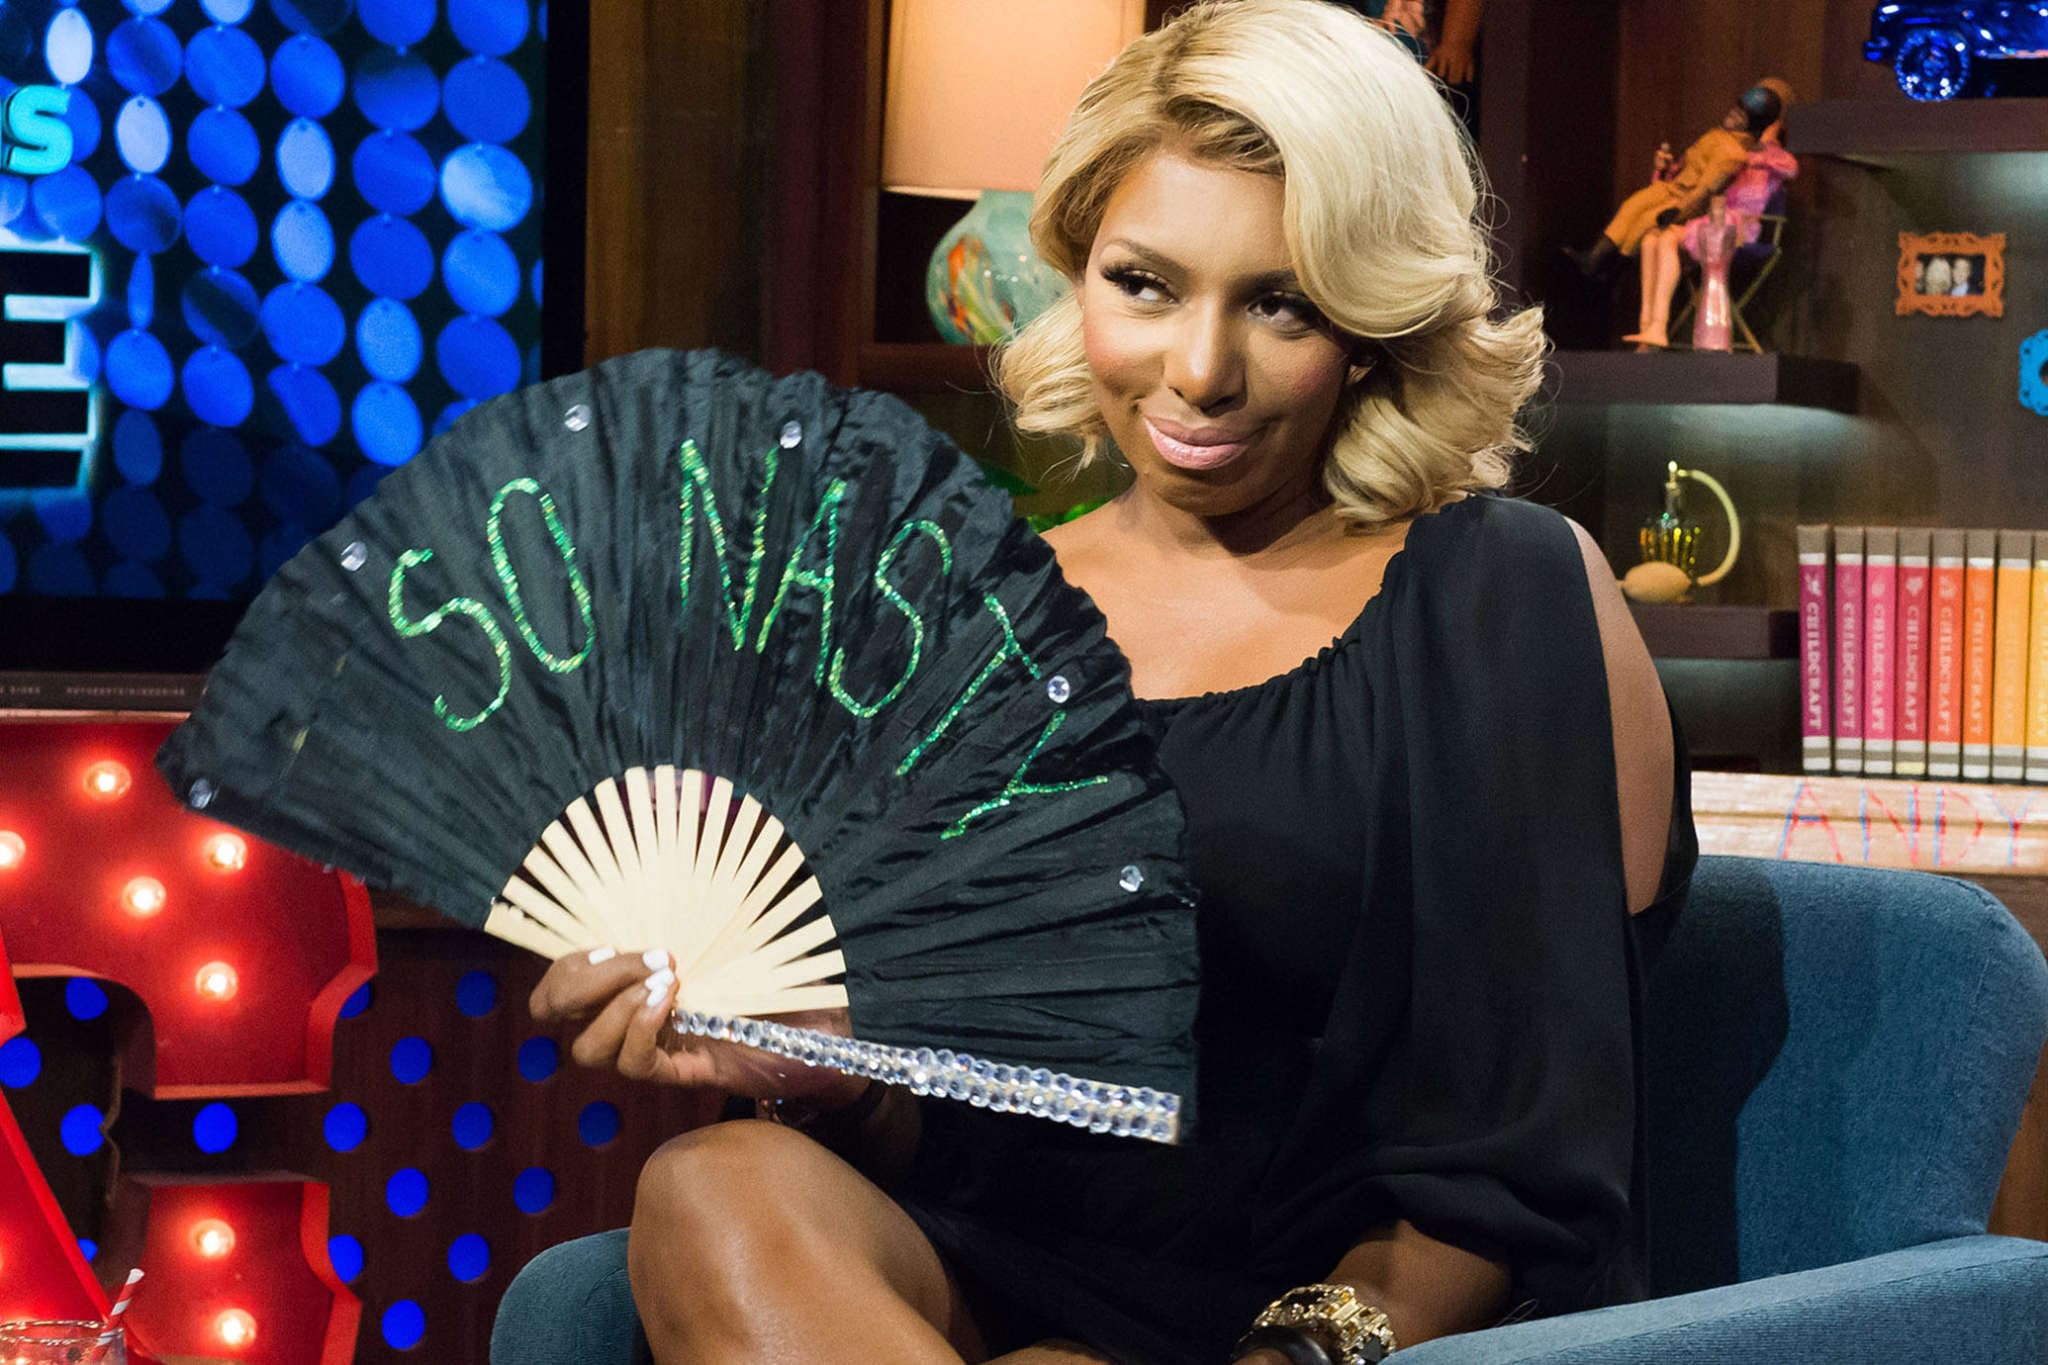 NeNe Leakes Shares A Couple Of Vogue-Like Pics And Has Fans Talking